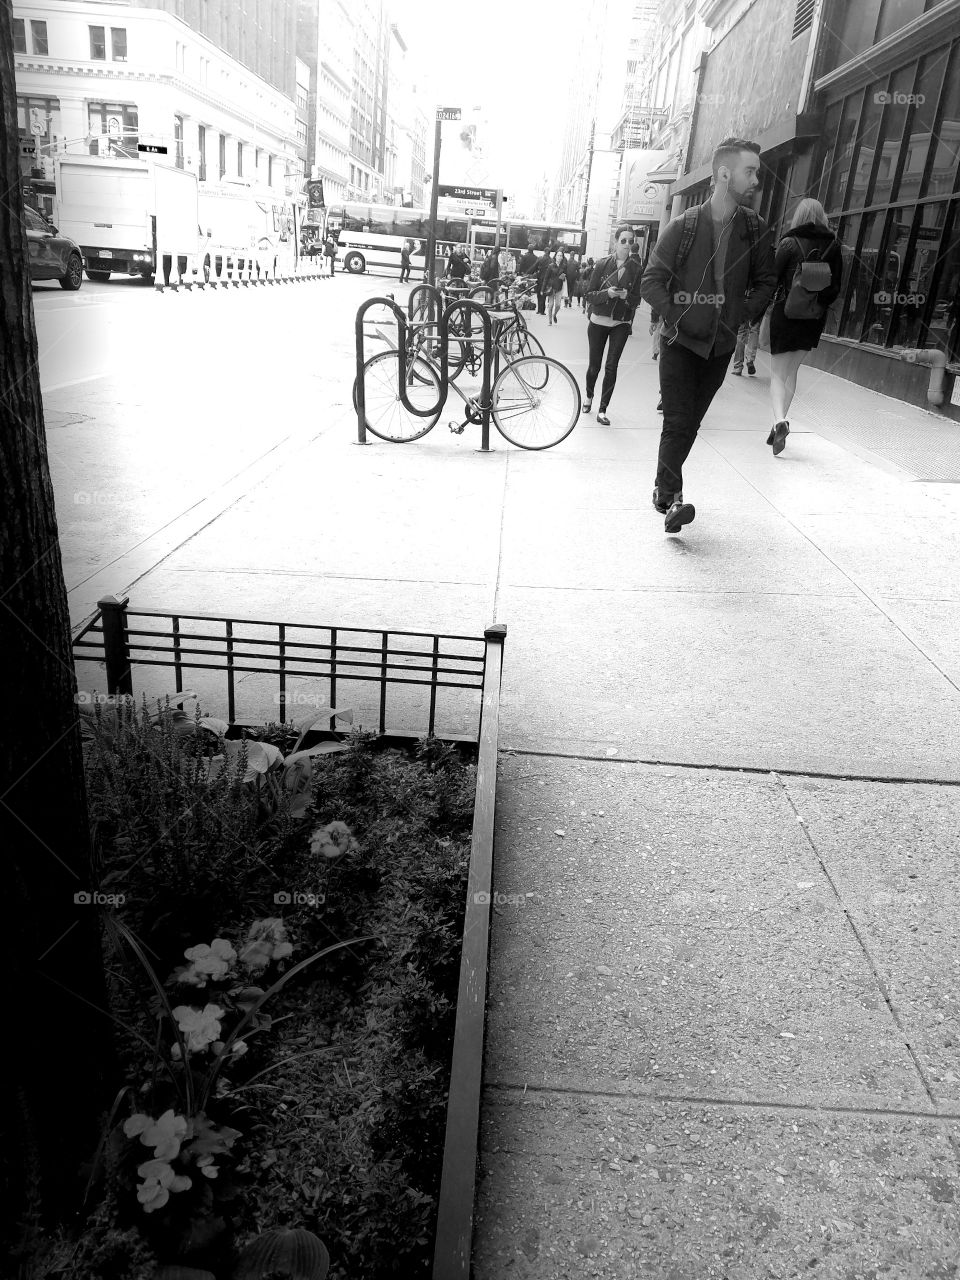 Morning Commute to Work in Manhattan near 6th Avenue and 23rd Street - People Walking - BNW Filter